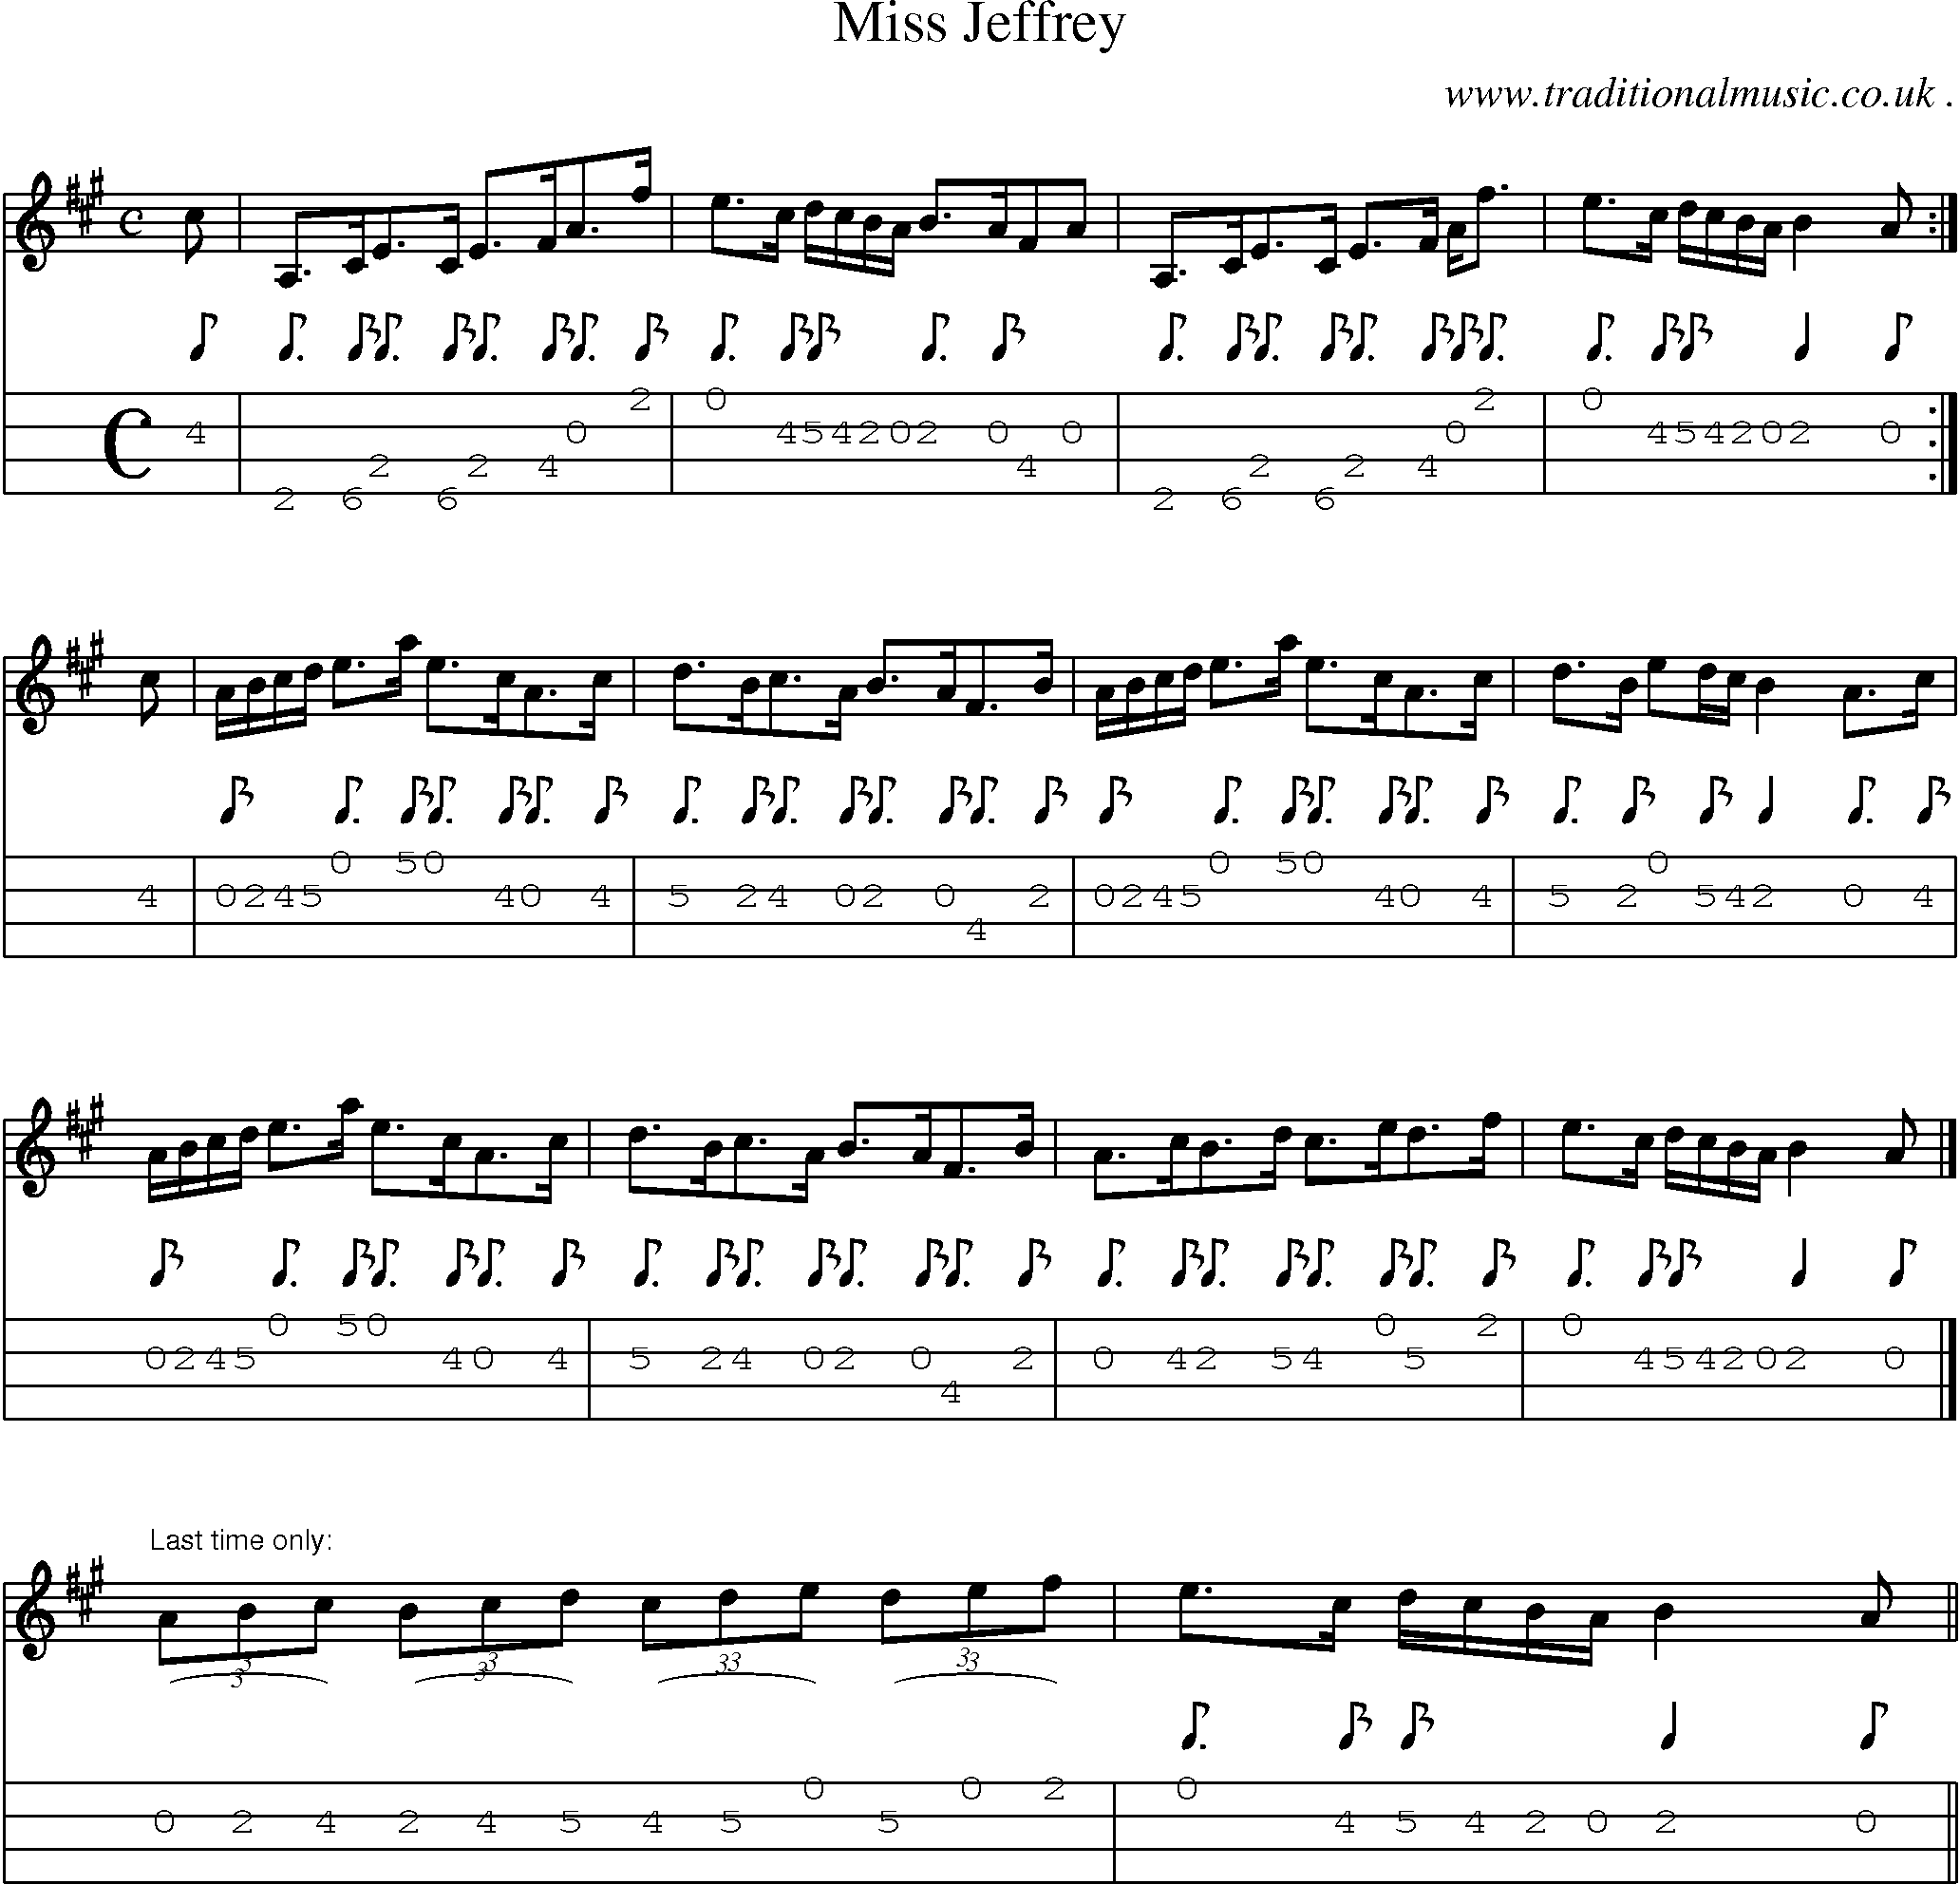 Sheet-music  score, Chords and Mandolin Tabs for Miss Jeffrey